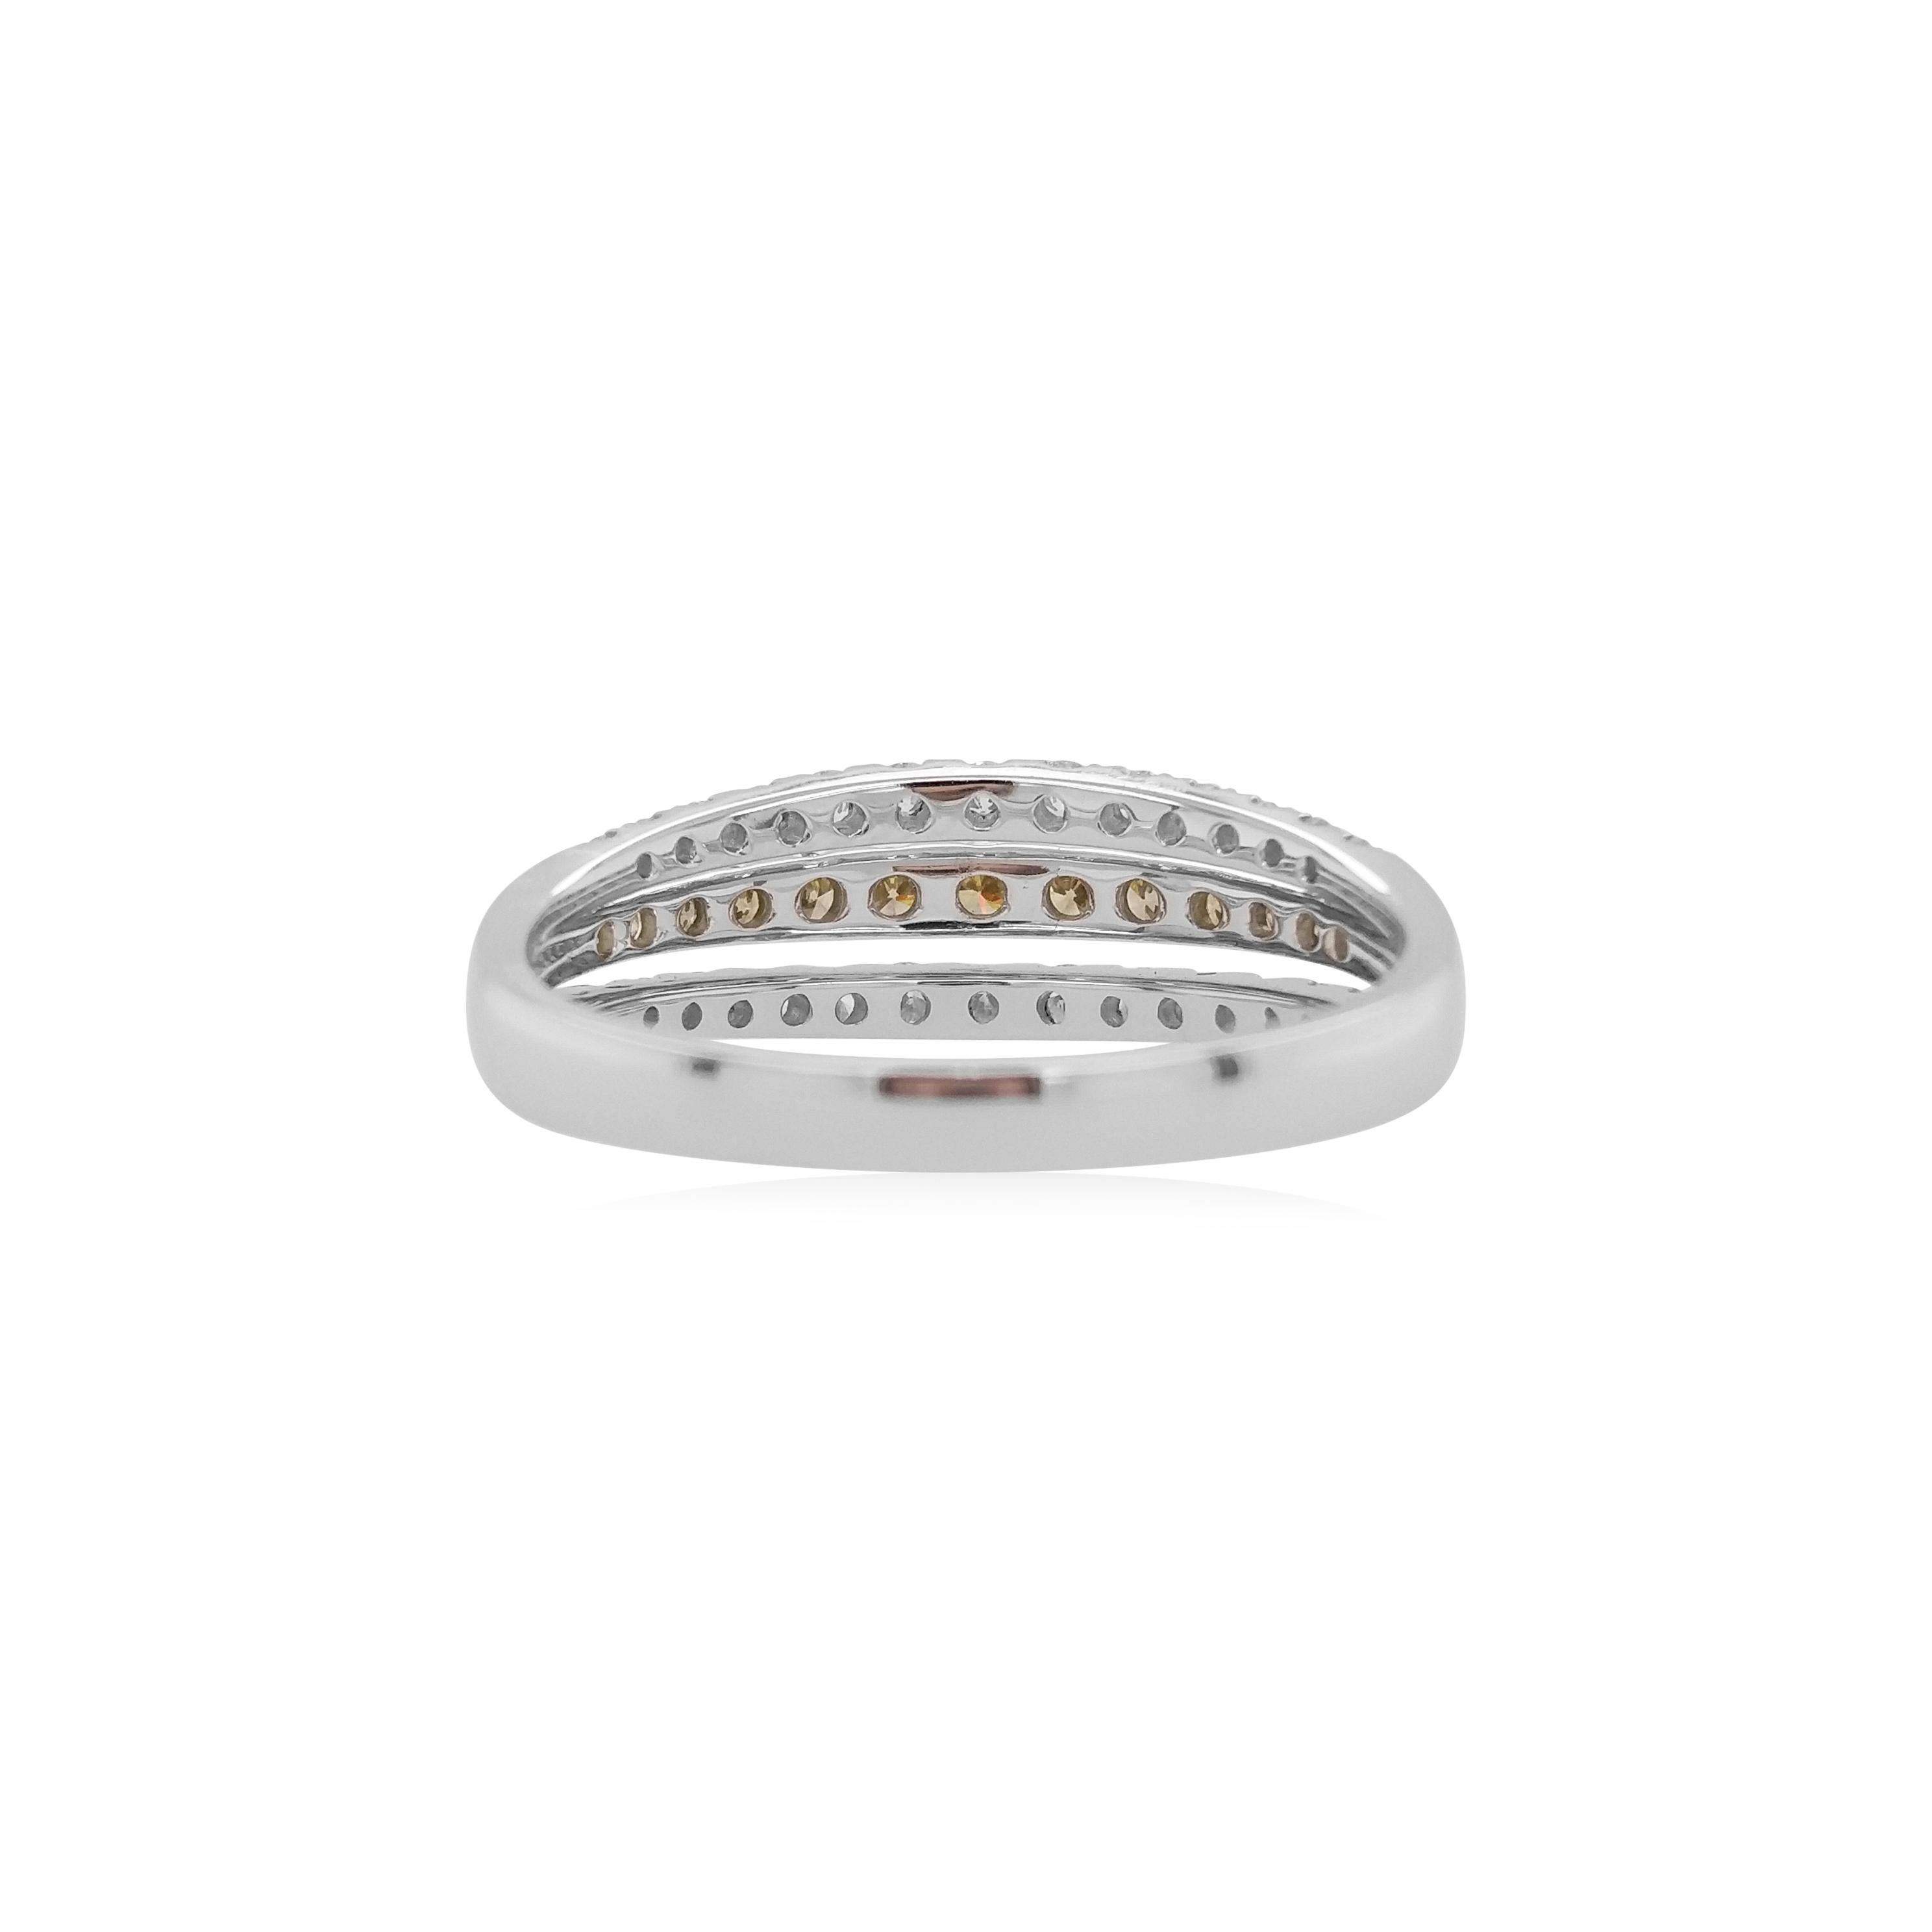 This graceful ring band features a row of glistening Green Diamonds at the center of its design. Perfectly highlighted by the 18 Karat white gold setting and dazzling white diamonds alongside. A must-have ring to any jewellery box, this piece would